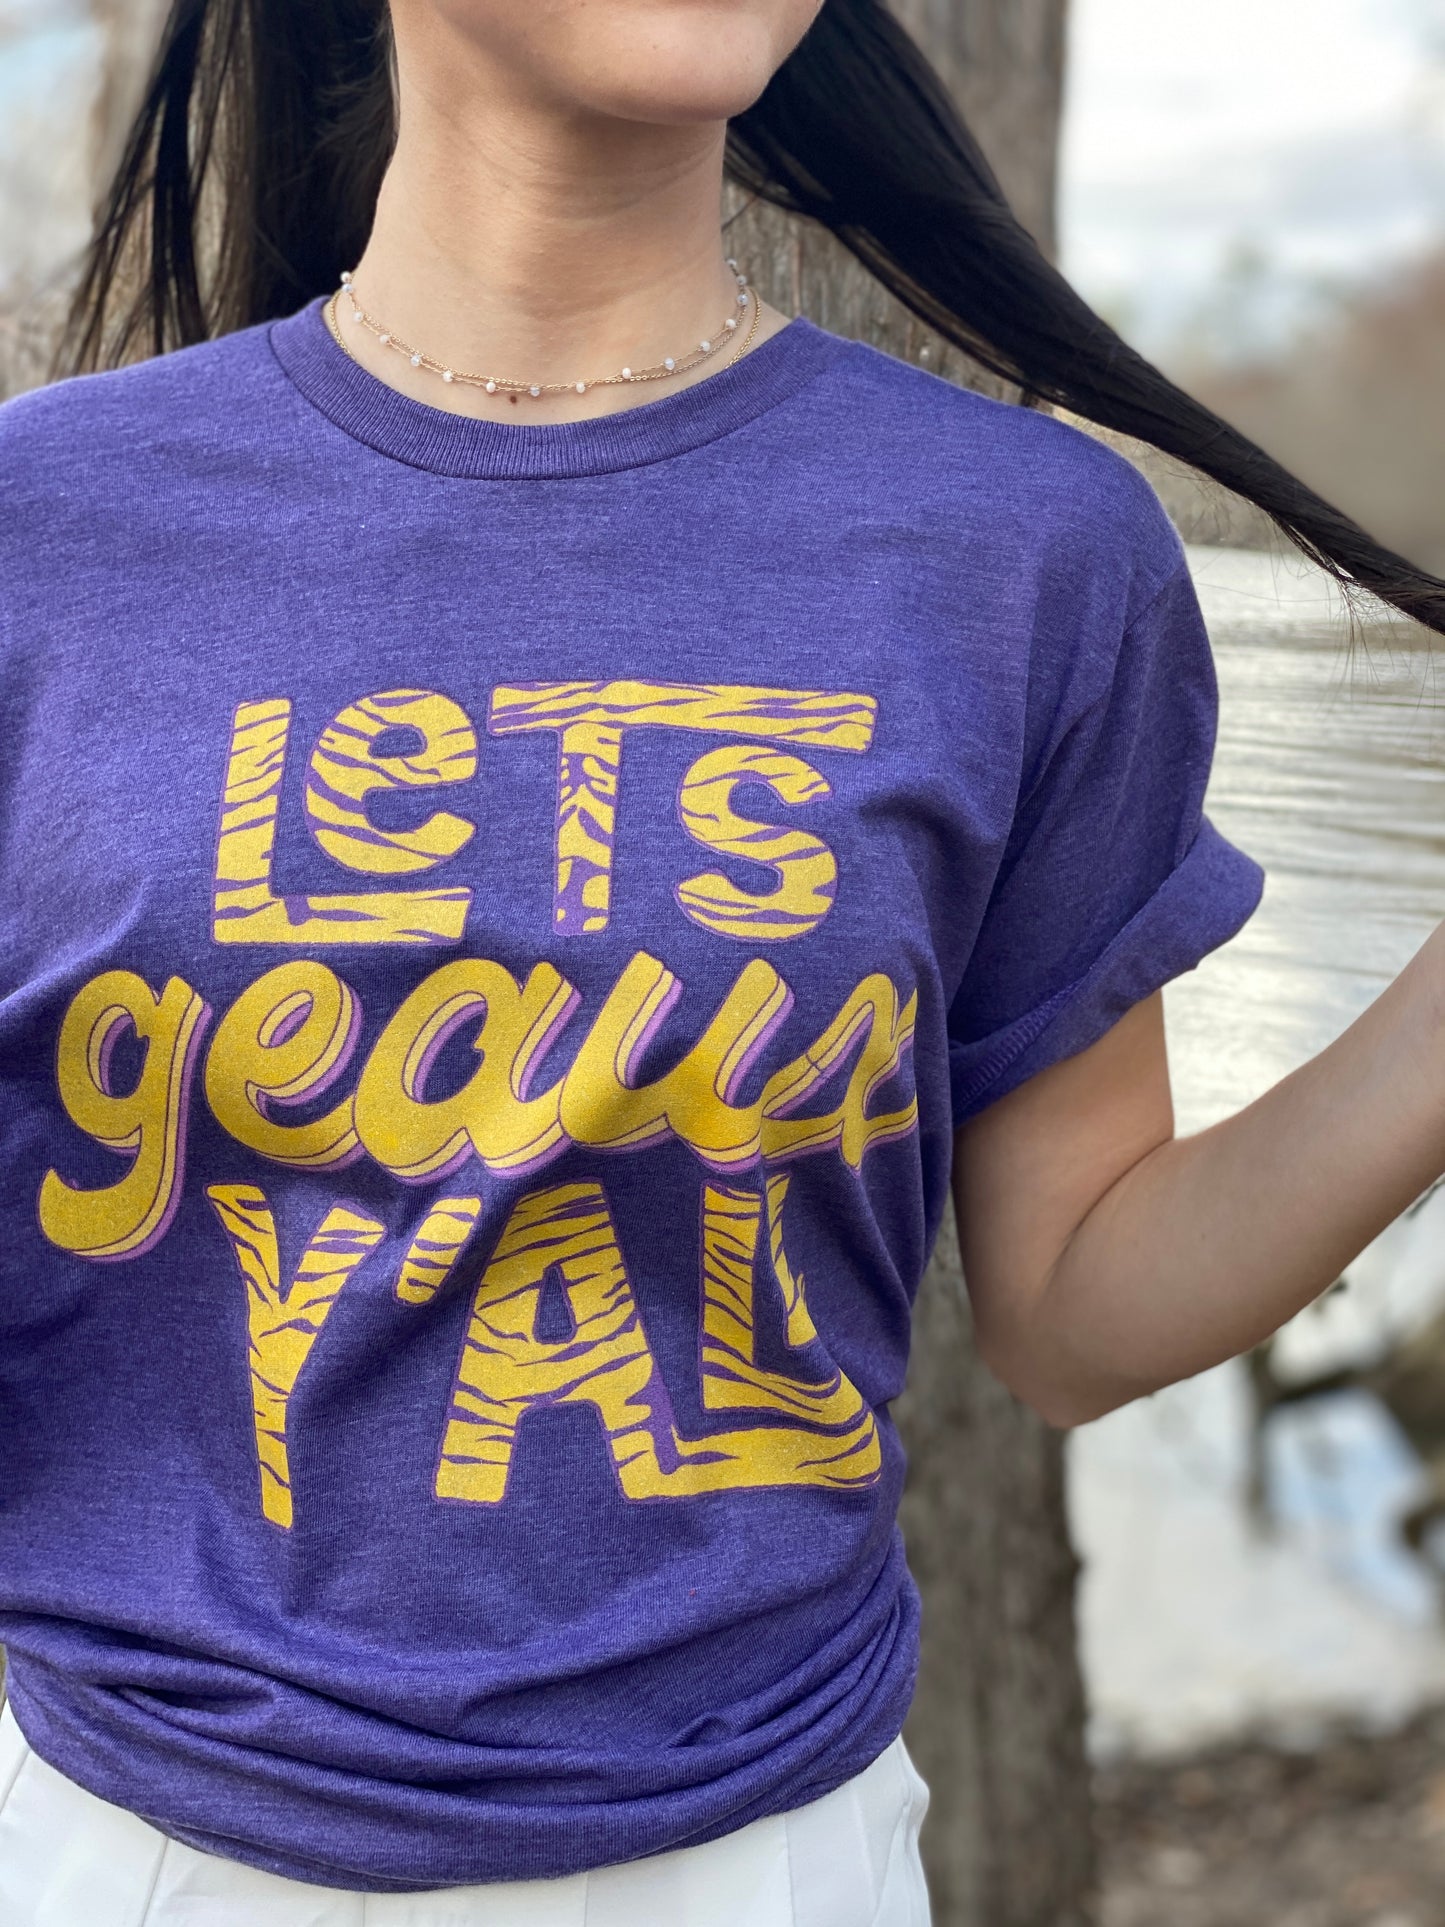 Let's Geaux Y'all Tee